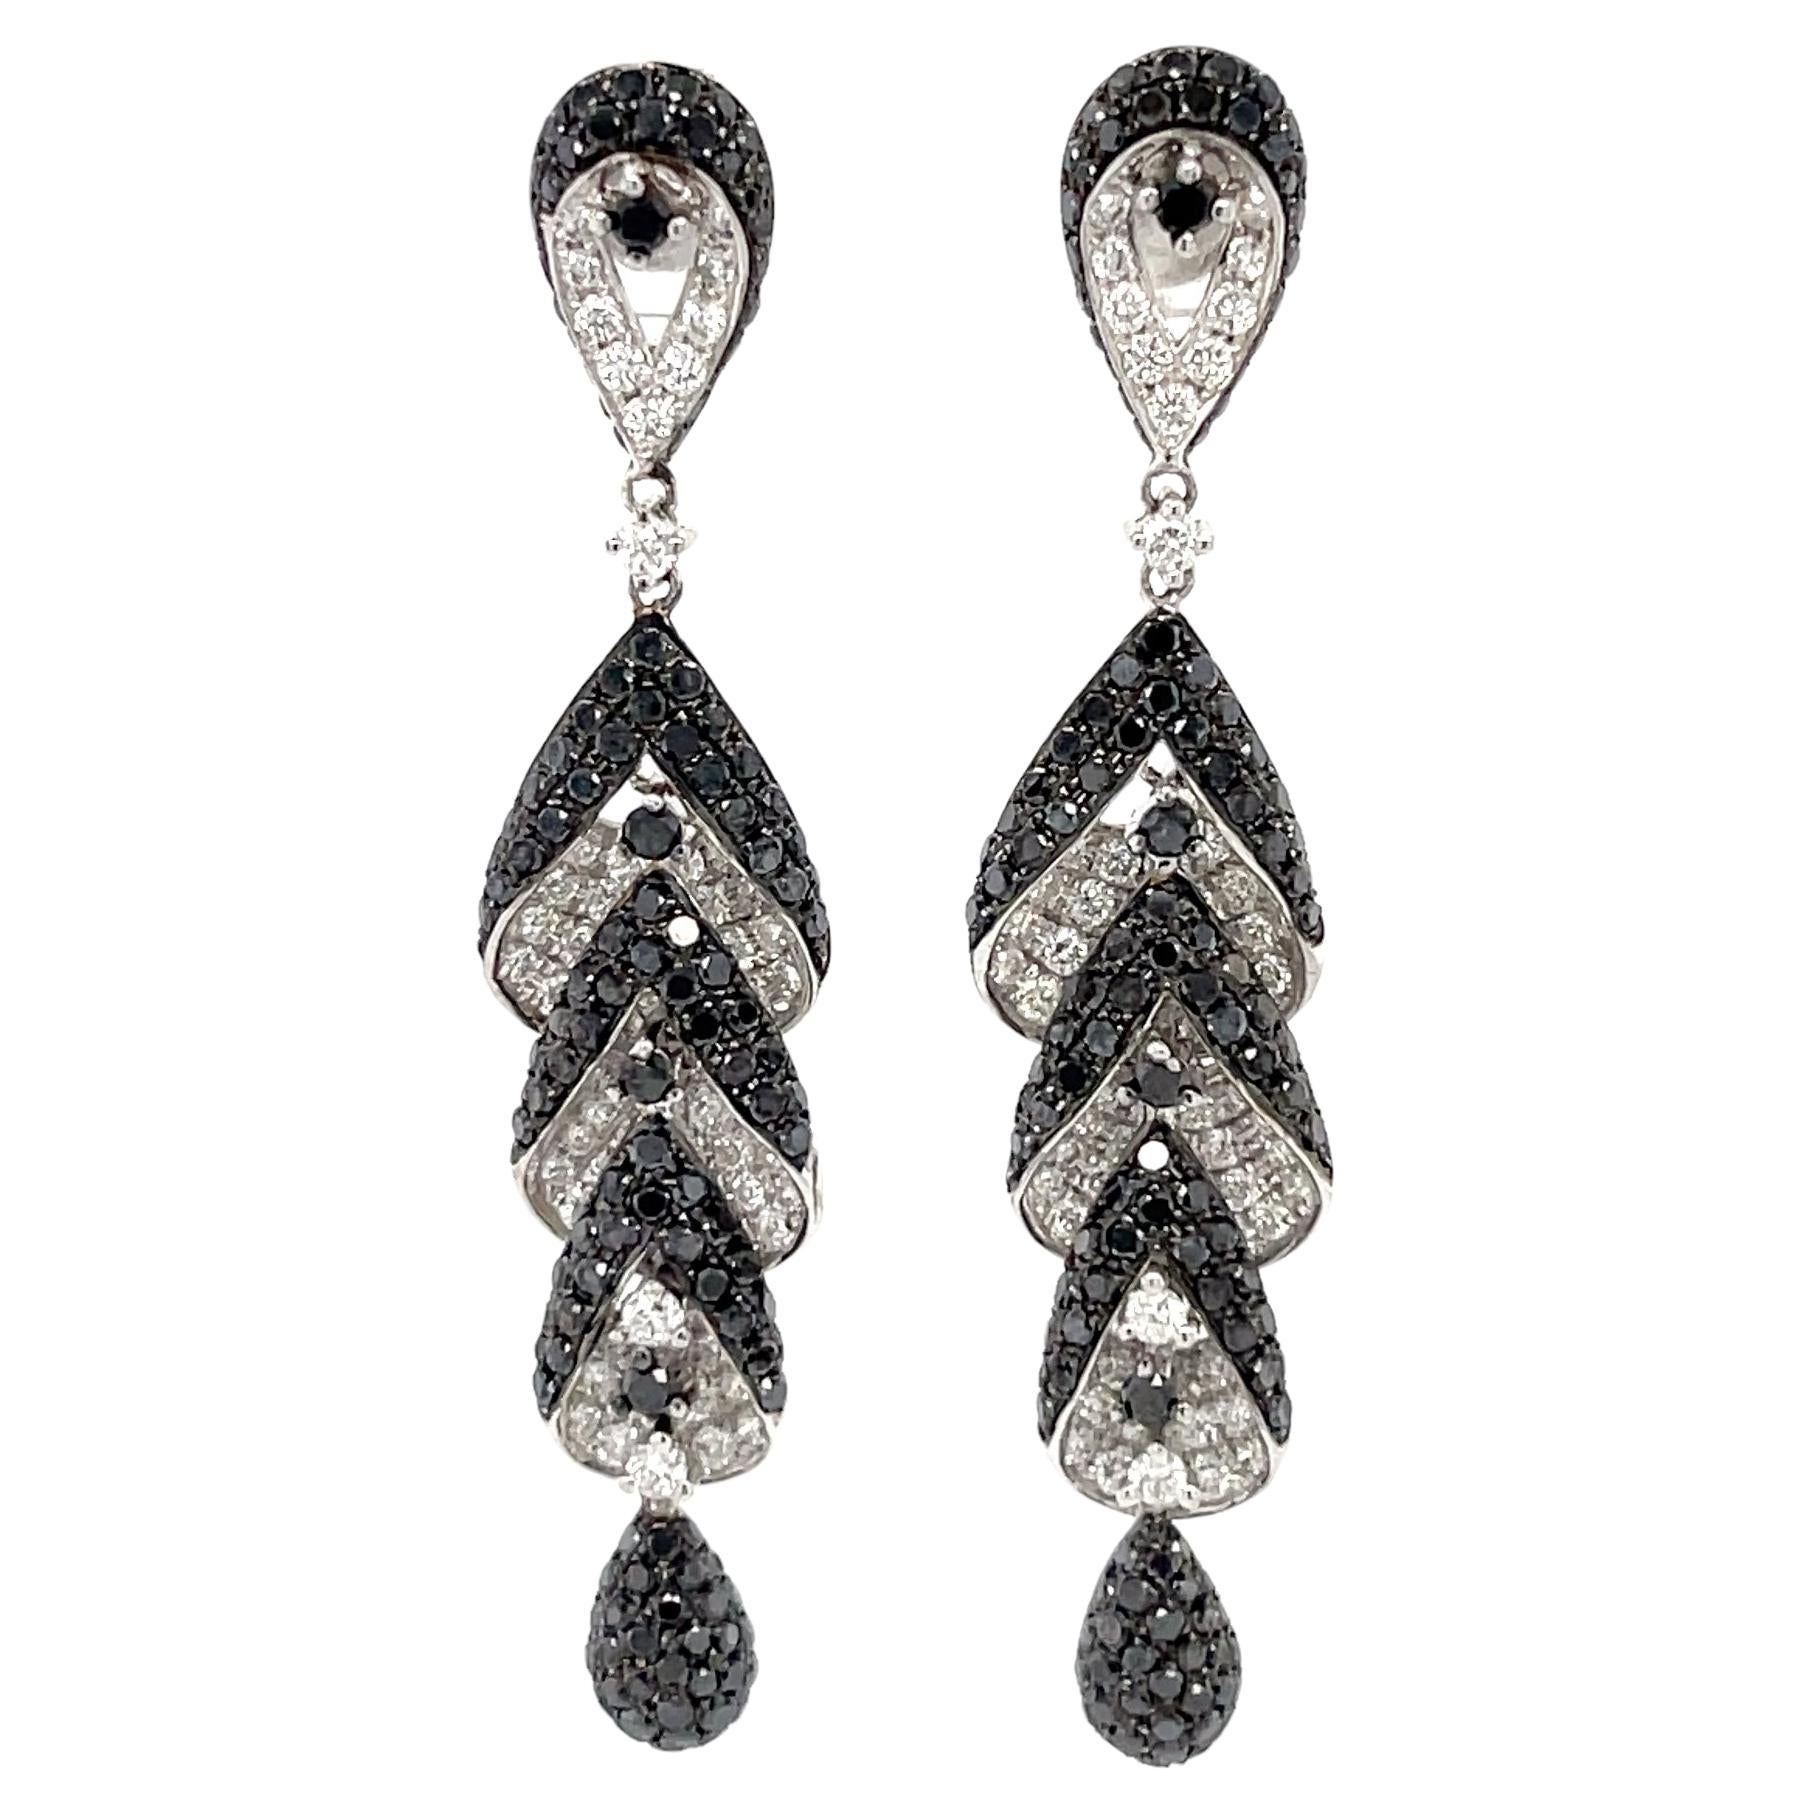 Black and White Diamond Dangling Earrings in 18KW Gold